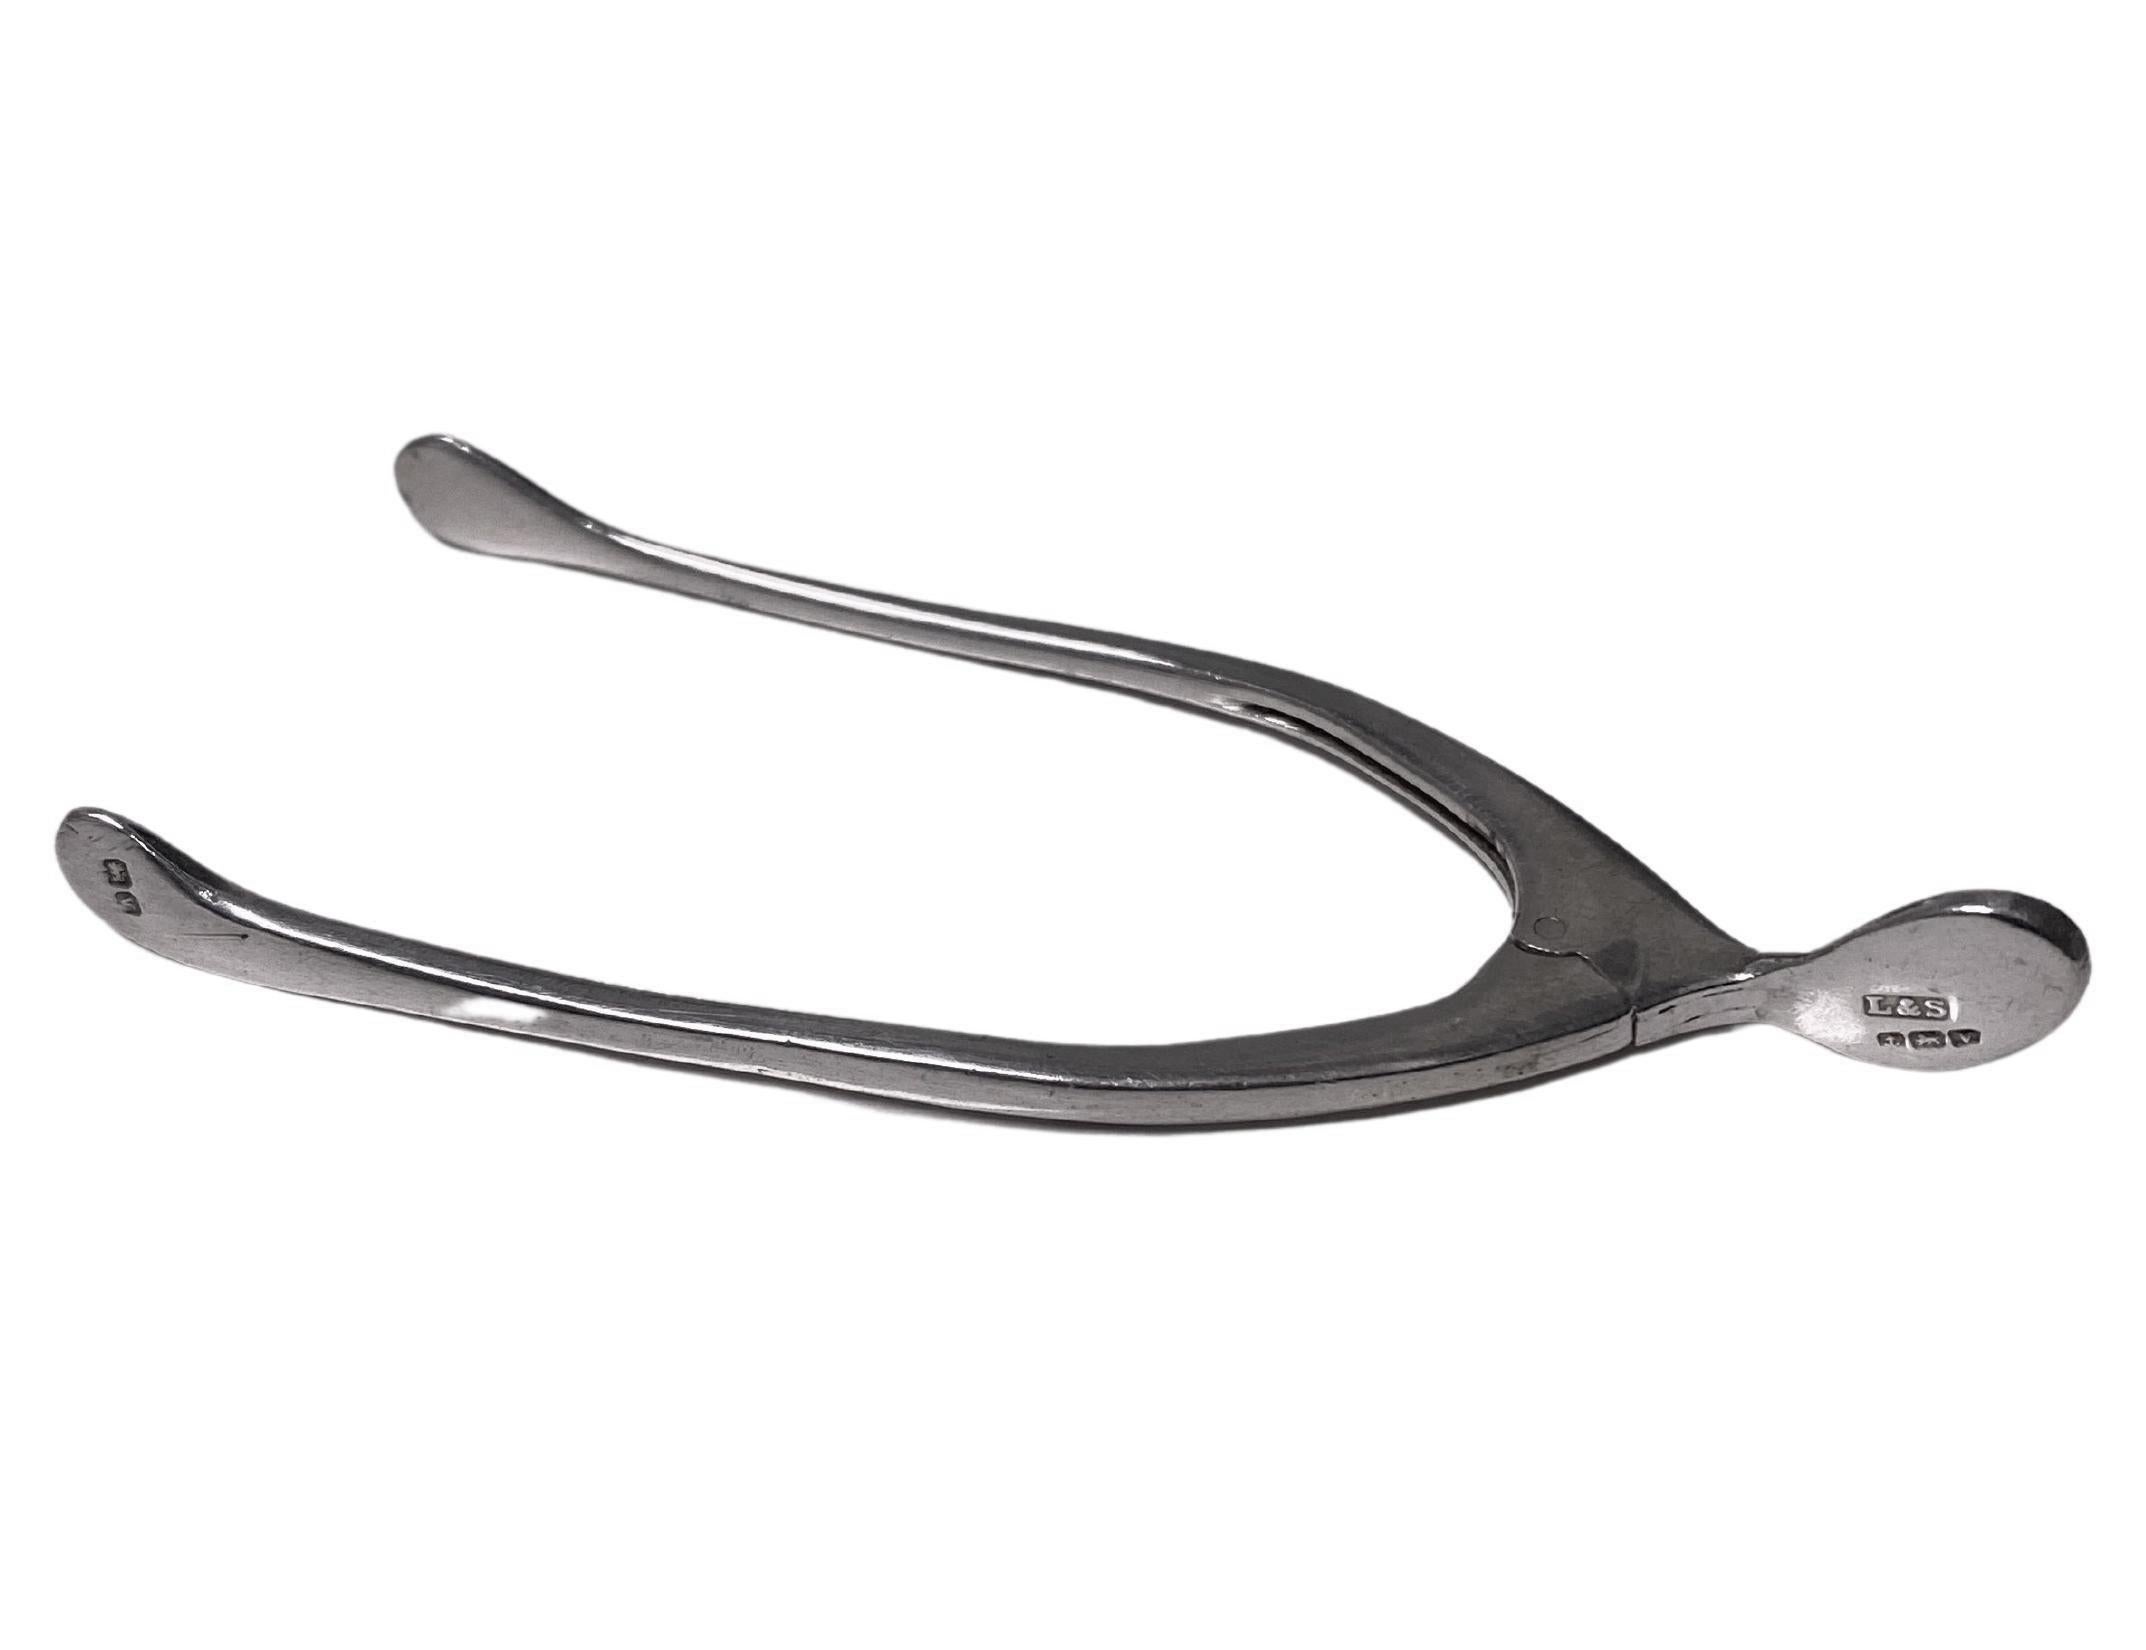 Antique Silver Wishbone Sugar Tongs Birmingham 1920 Levi and Salaman. Flexible integral spring wishbone tongs, plain design. Hallmarked on handle and tong. Length: 3.50 inches. Weight: 13.09 grams